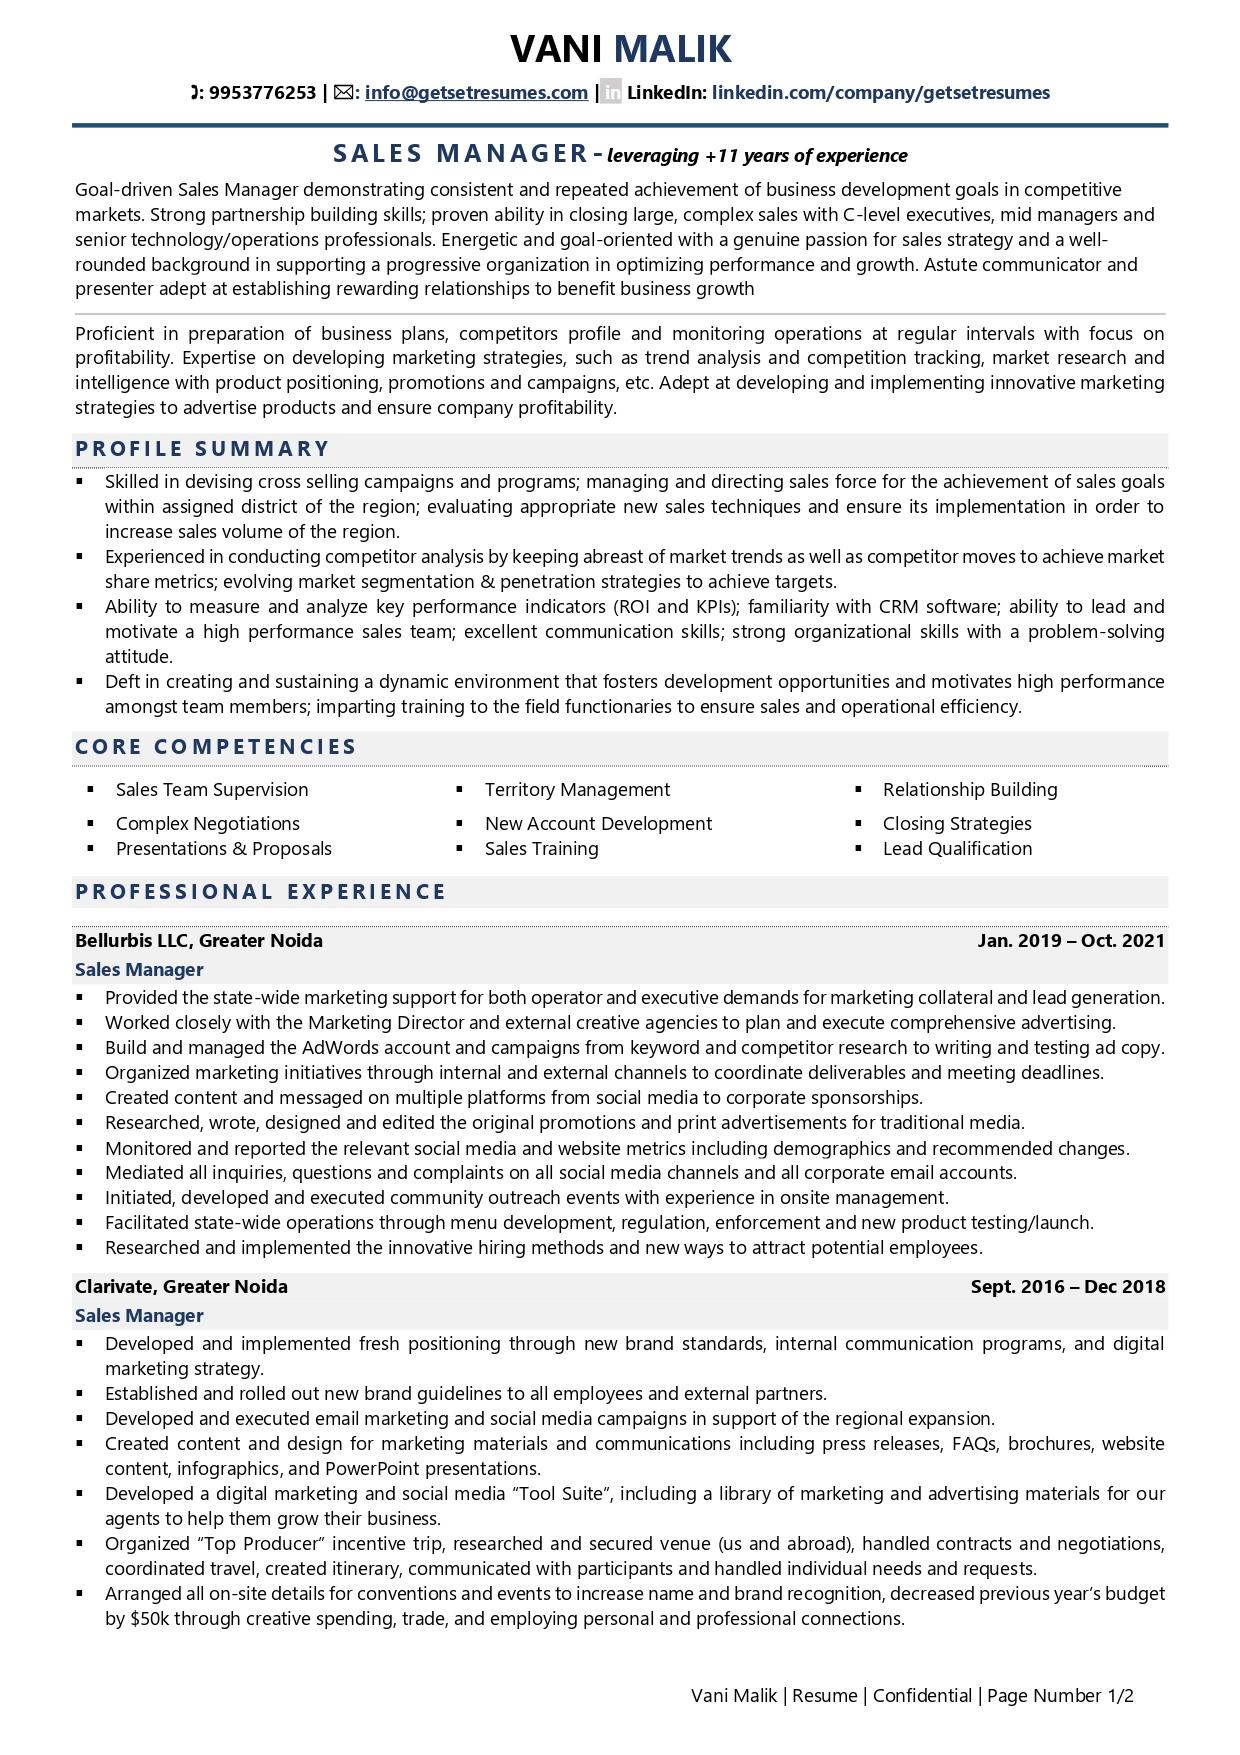 sales-manager-resume-examples-template-with-job-winning-tips